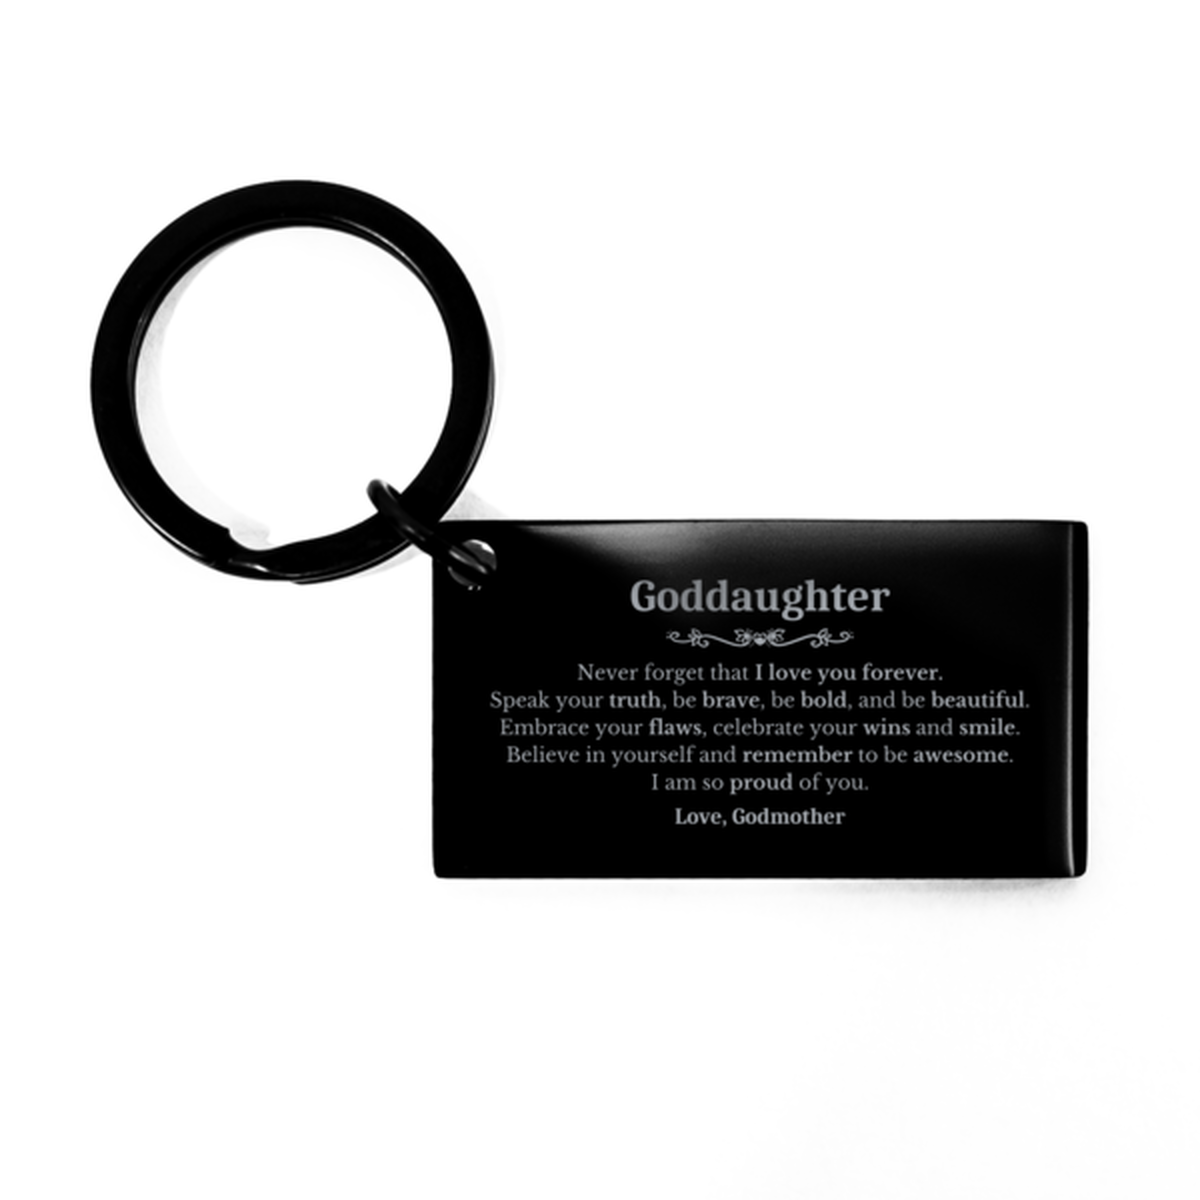 Goddaughter Keychain, Never forget that I love you forever, Inspirational Goddaughter Birthday Unique Gifts From Godmother